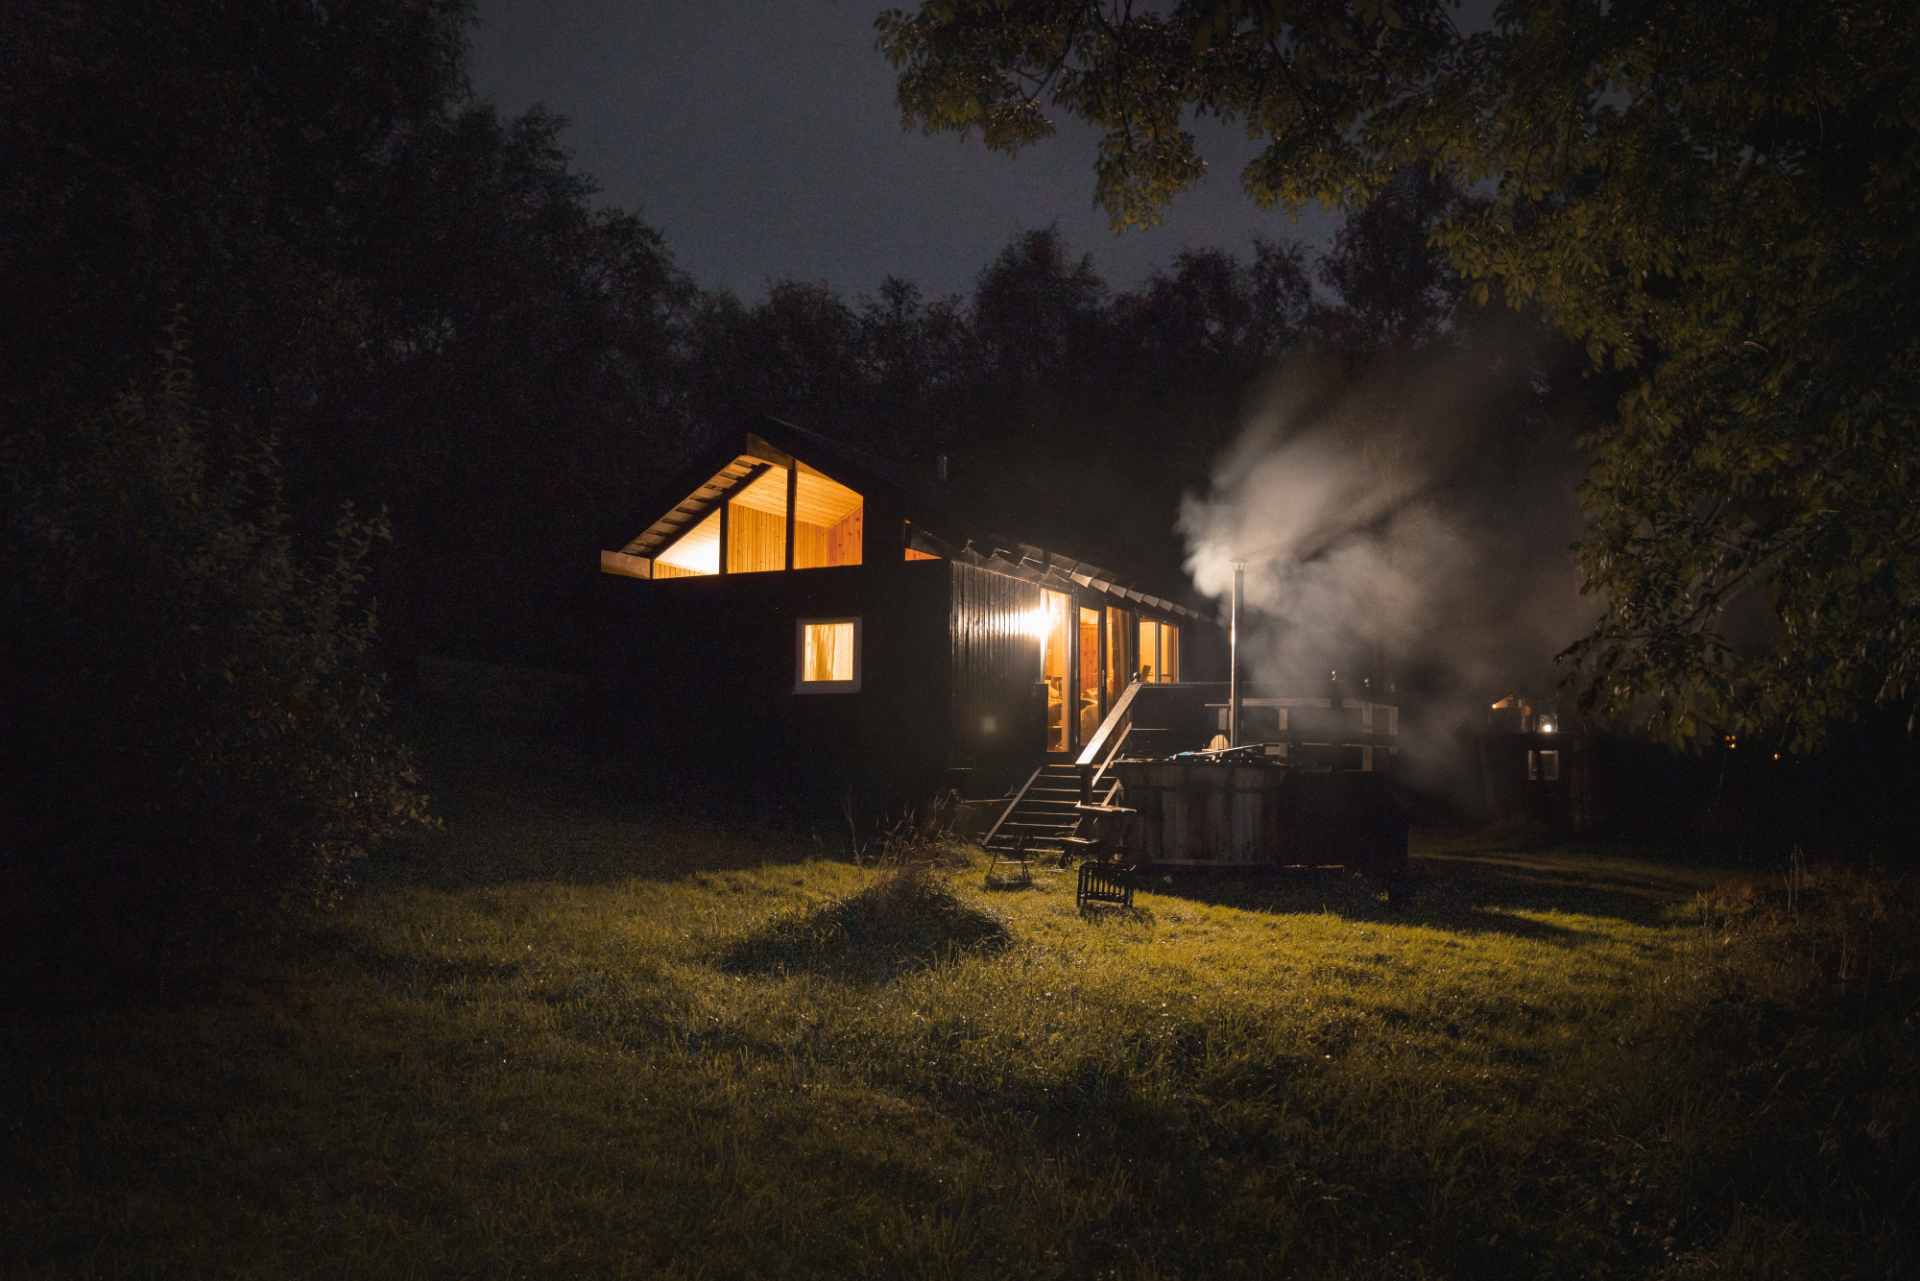 fyne-cabin-with-hot-tub-in-field-lit-up-at-night